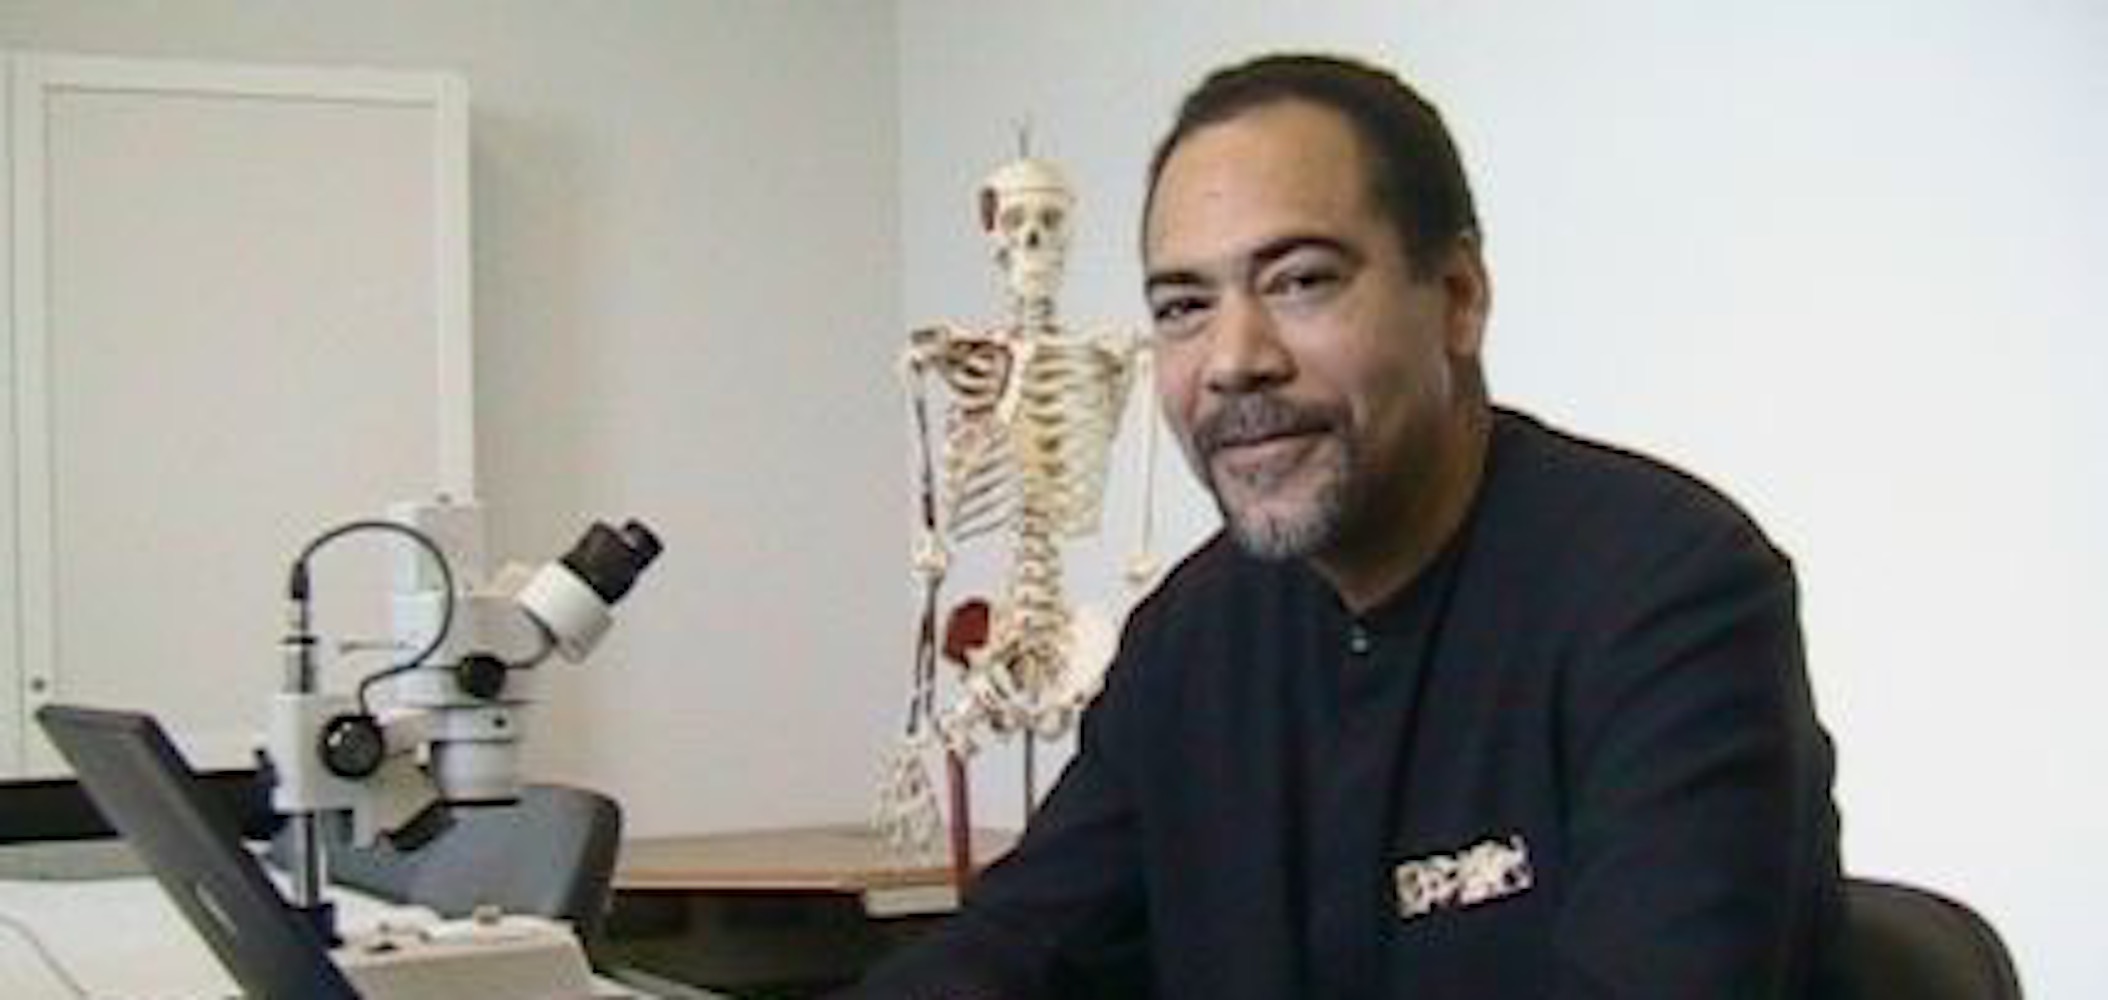 Anthropology, Racial Science, and the Harvesting of Black Bones: Dr. Michael Blakey Interviewed by Dr. Jemima Pierre